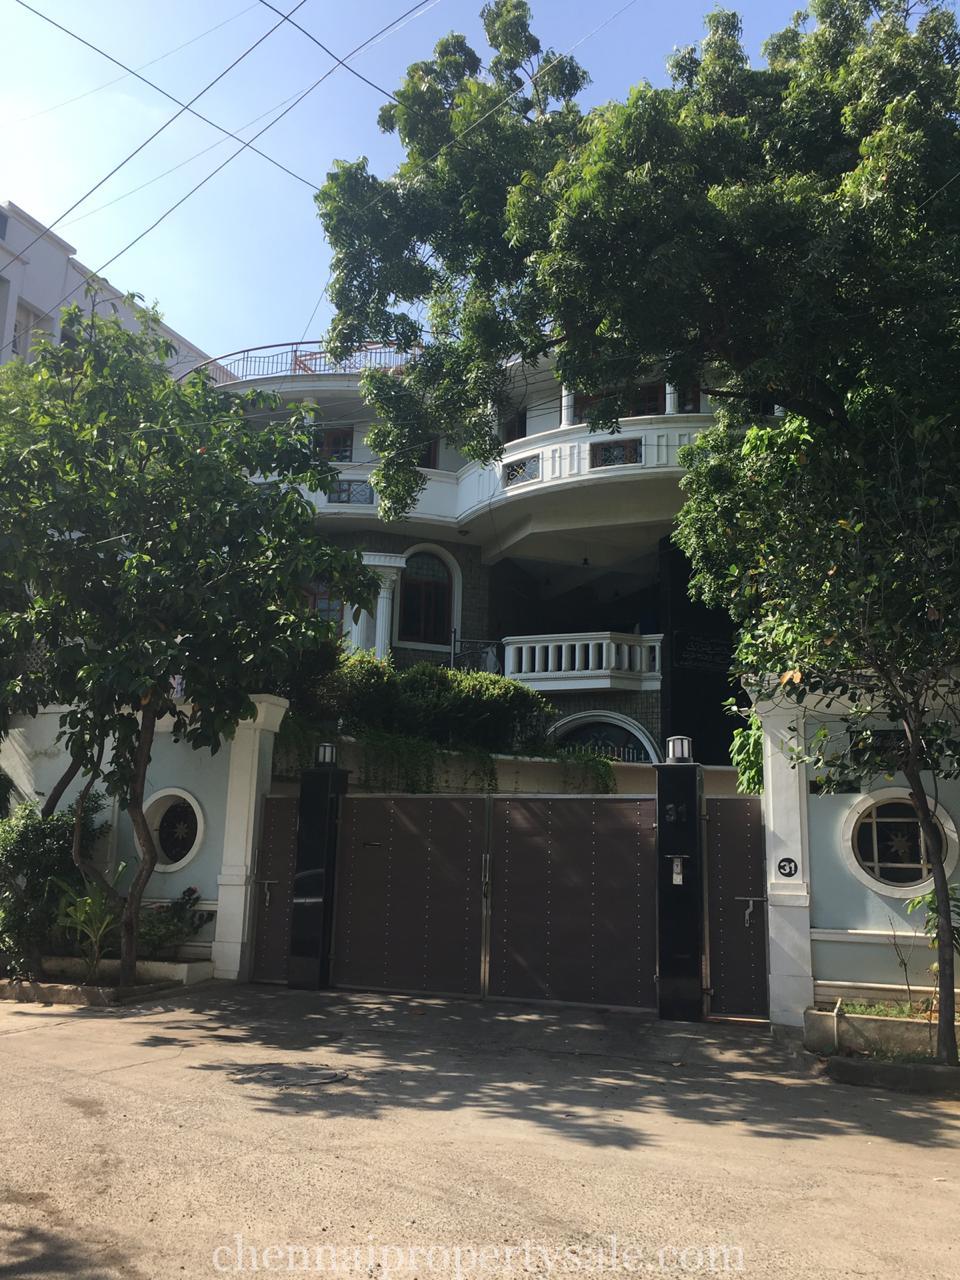 Individual bunglow for sale in chennai G + 2 building